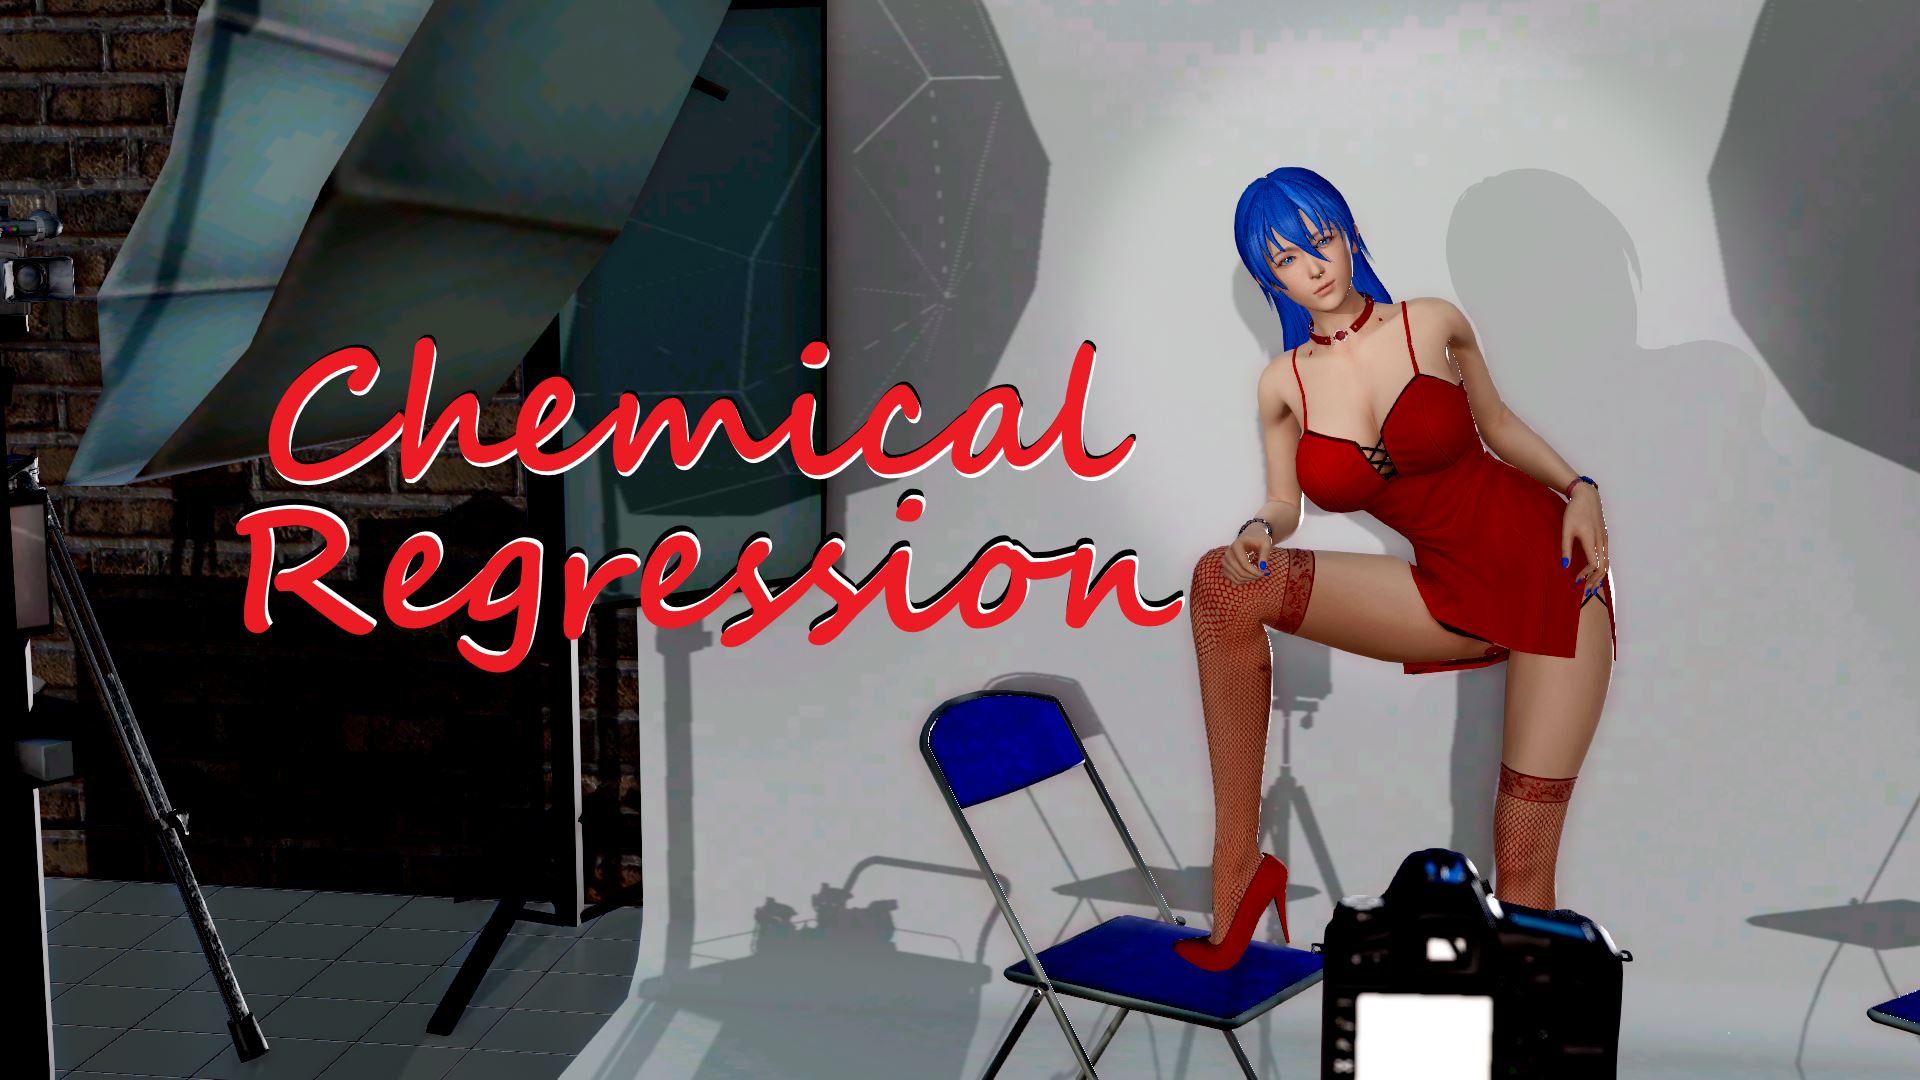 Chemical Regression porn xxx game download cover